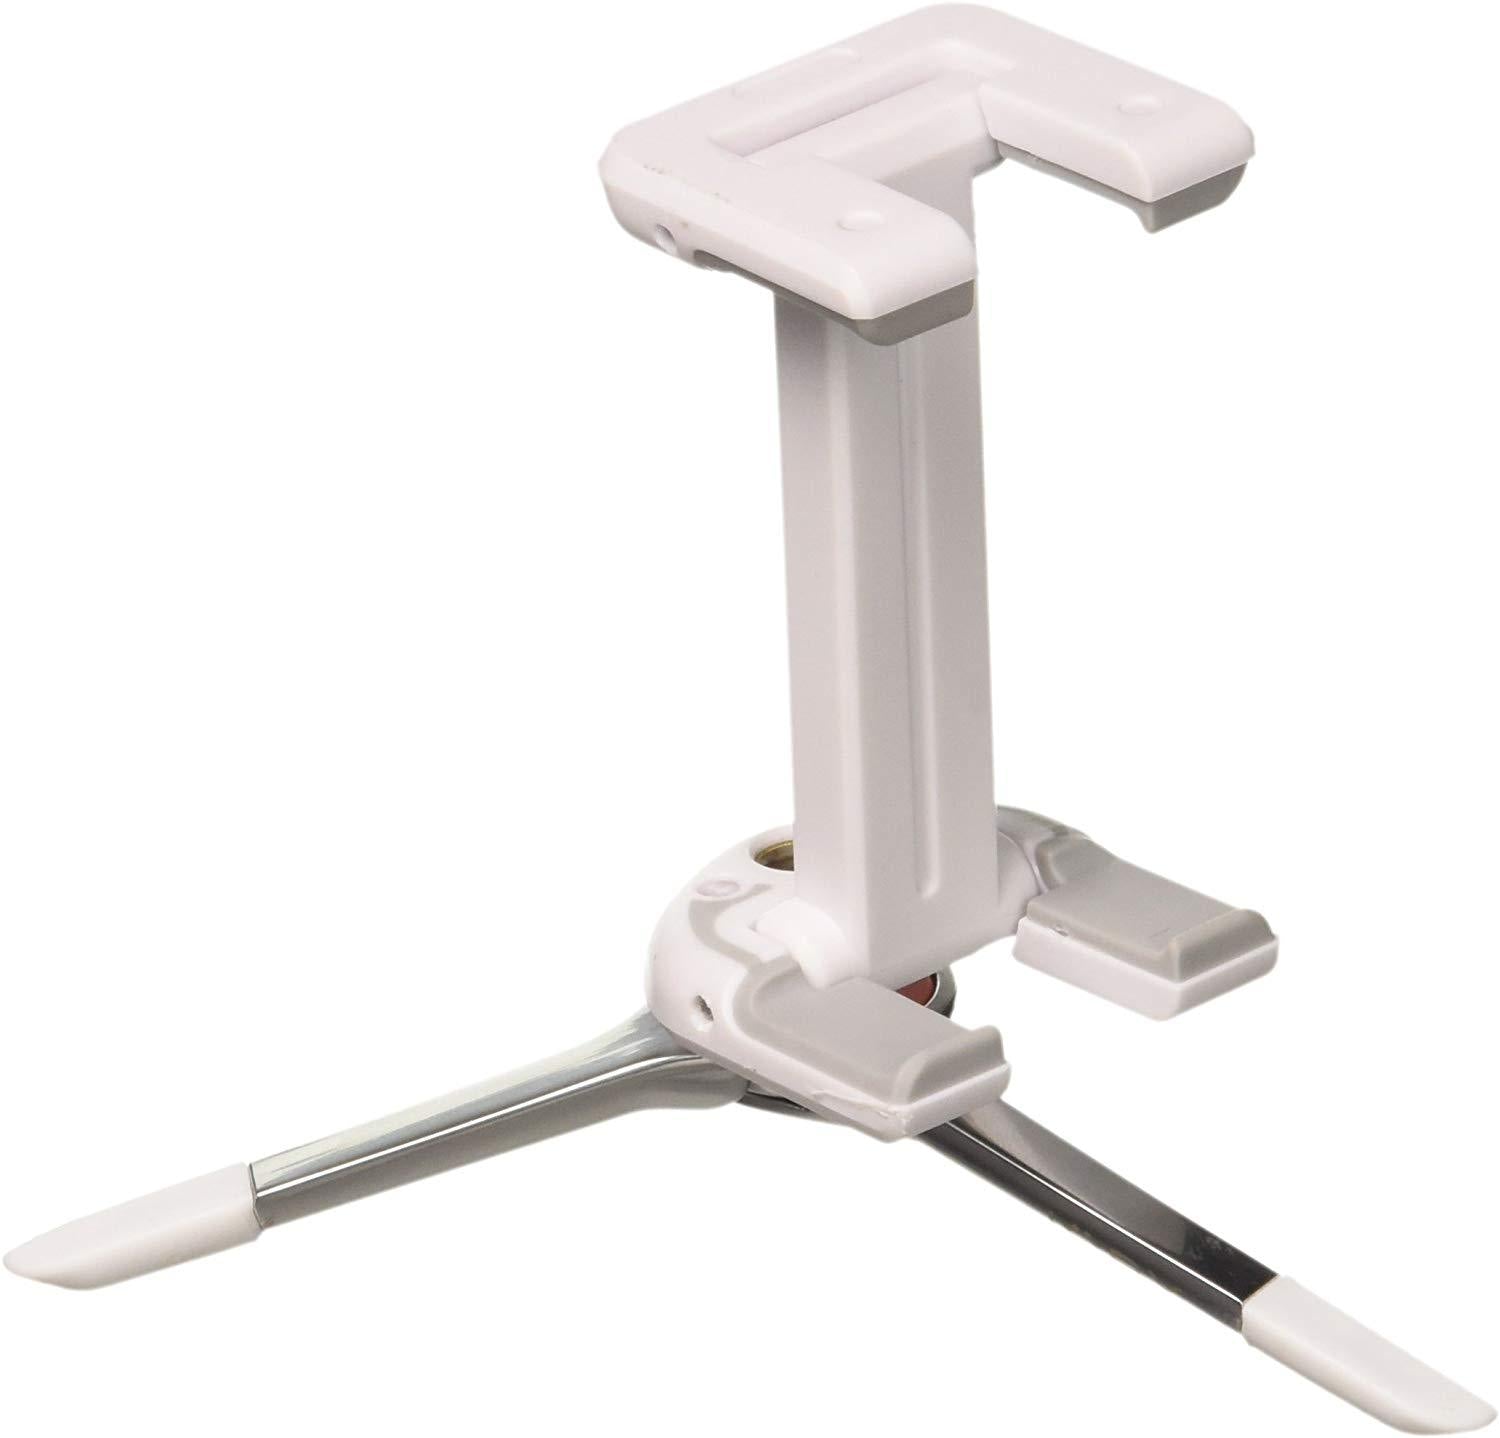 JOBY GripTight ONE Micro Stand with Compact Stand for Smartphones - White